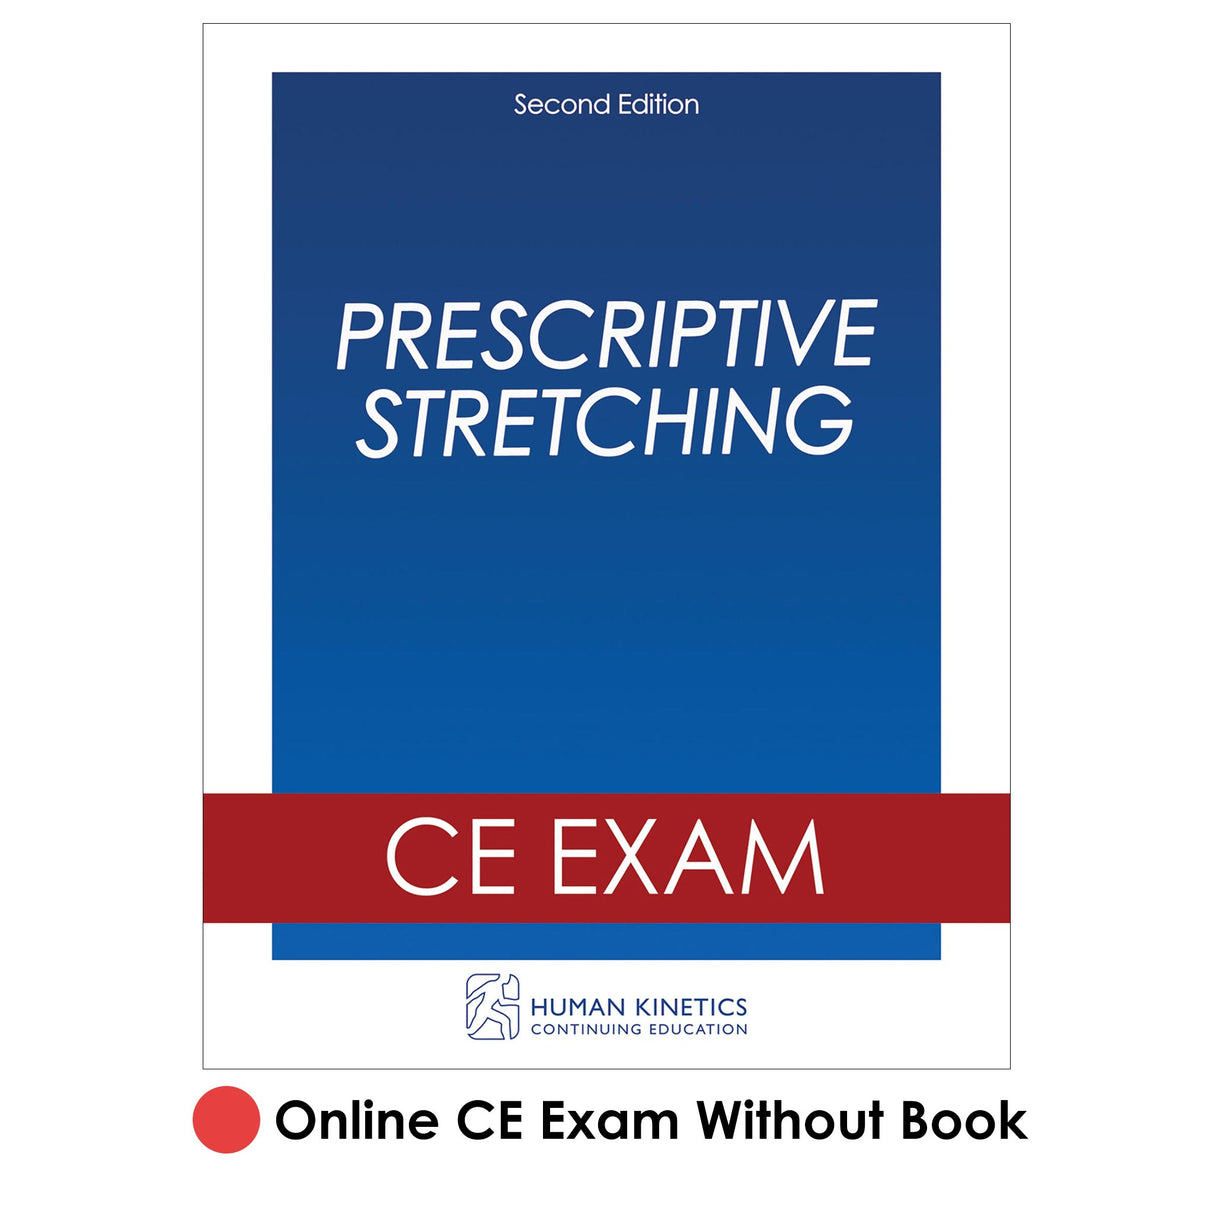 Prescriptive Stretching 2nd Edition Online CE Exam Without Book